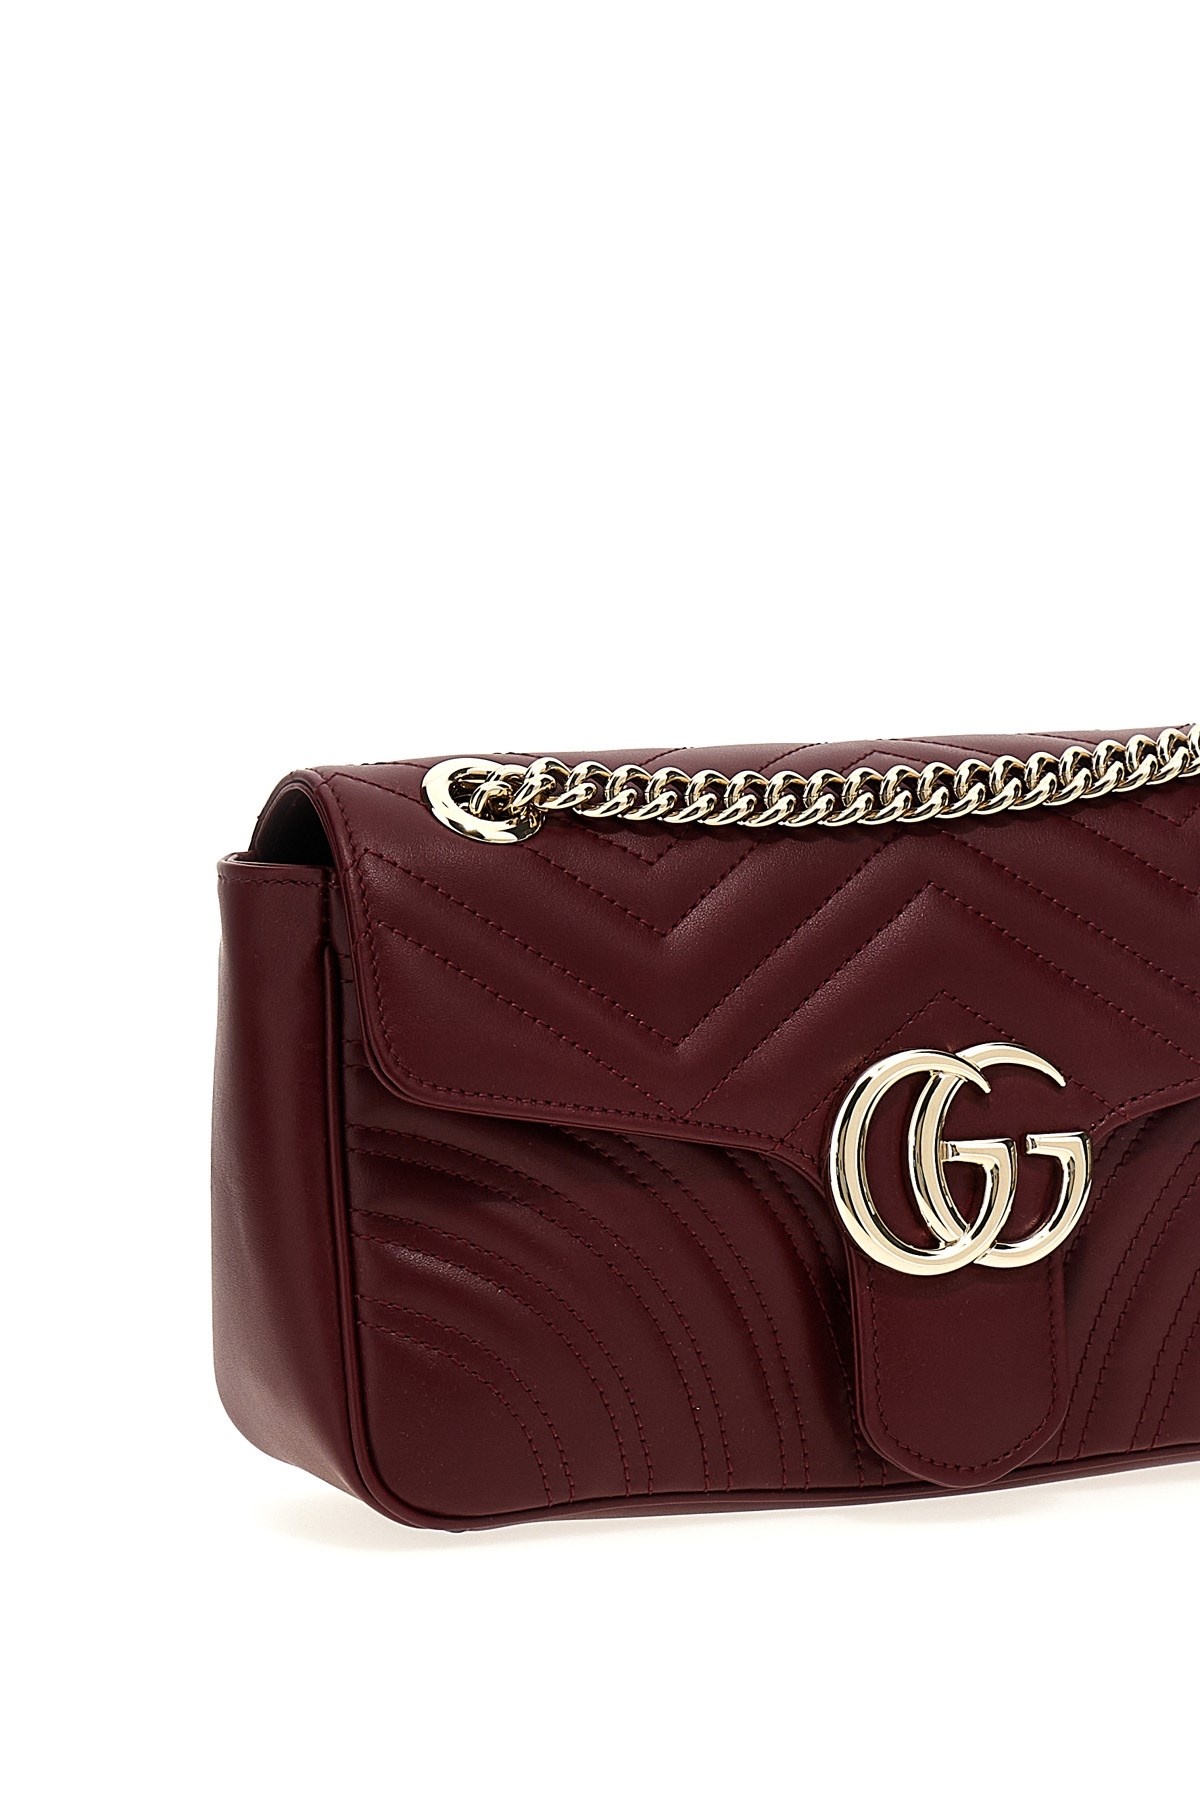 'GG Marmont' small shoulder bag - 4